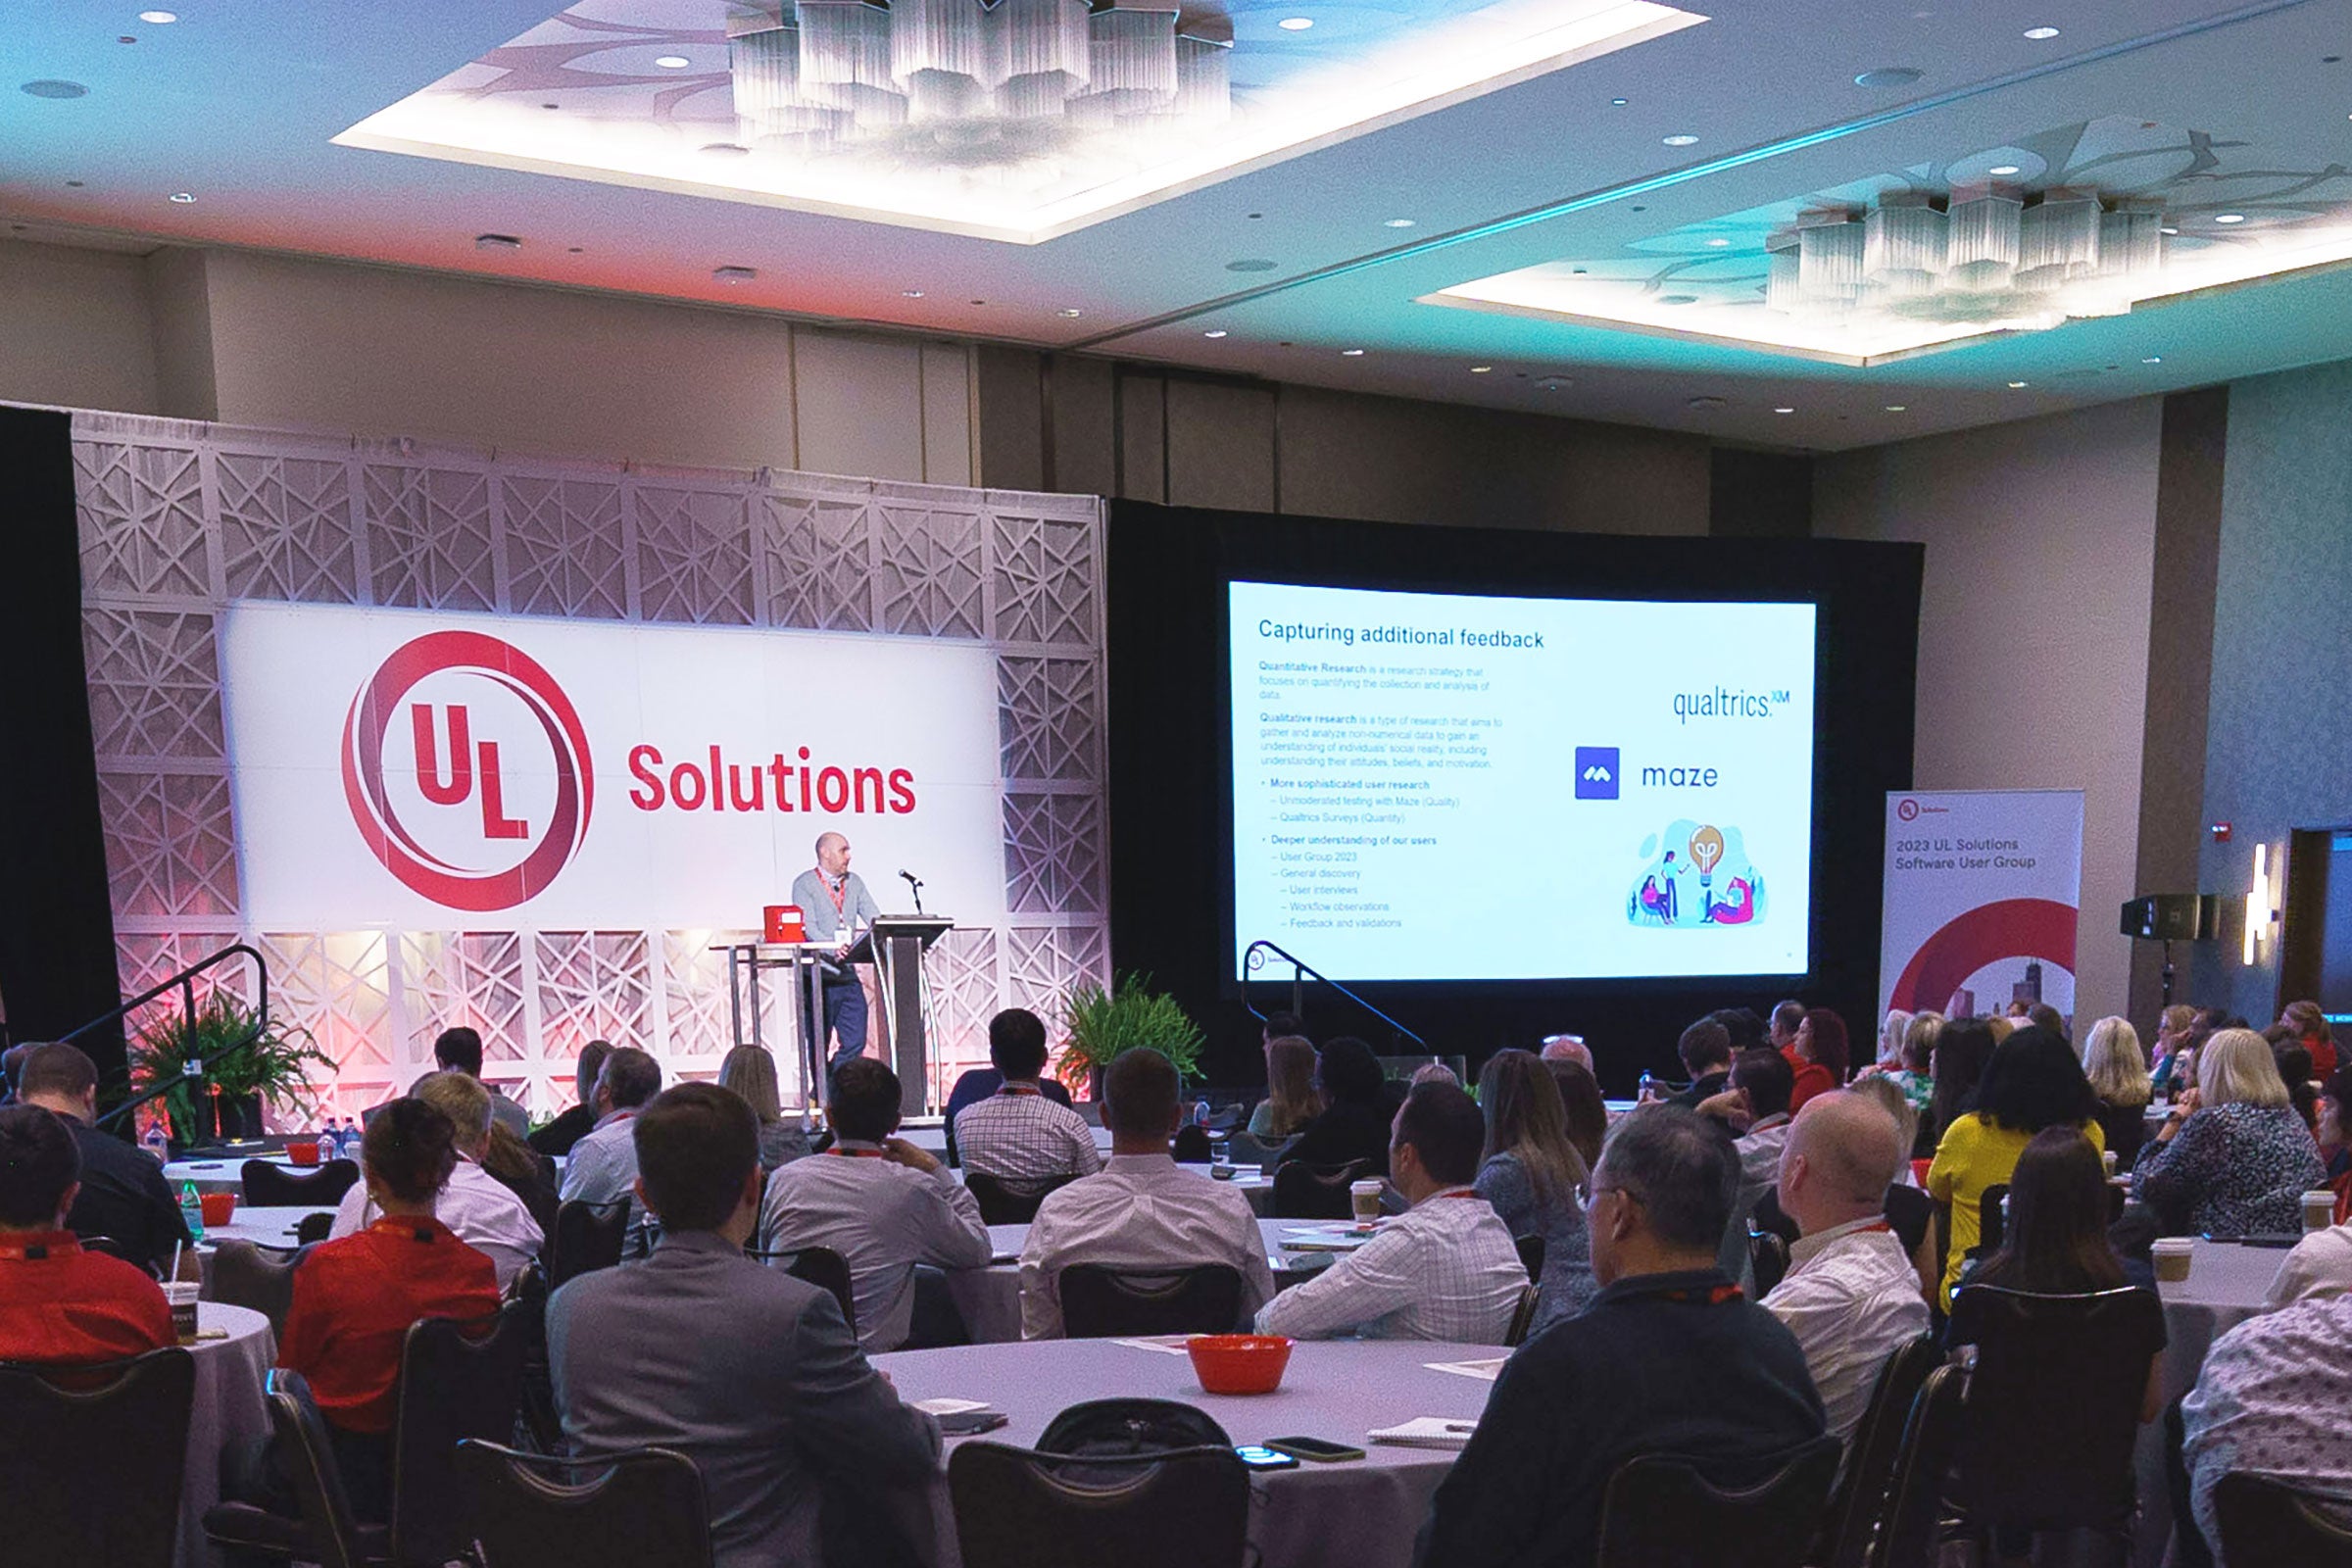 More than 100 customers join the 27th annual UL Solutions Software User Group. In addition to updates on software enhancements, other topics discussed included industry challenges and opportunities regarding emerging regulations, product stewardship and sustainability.